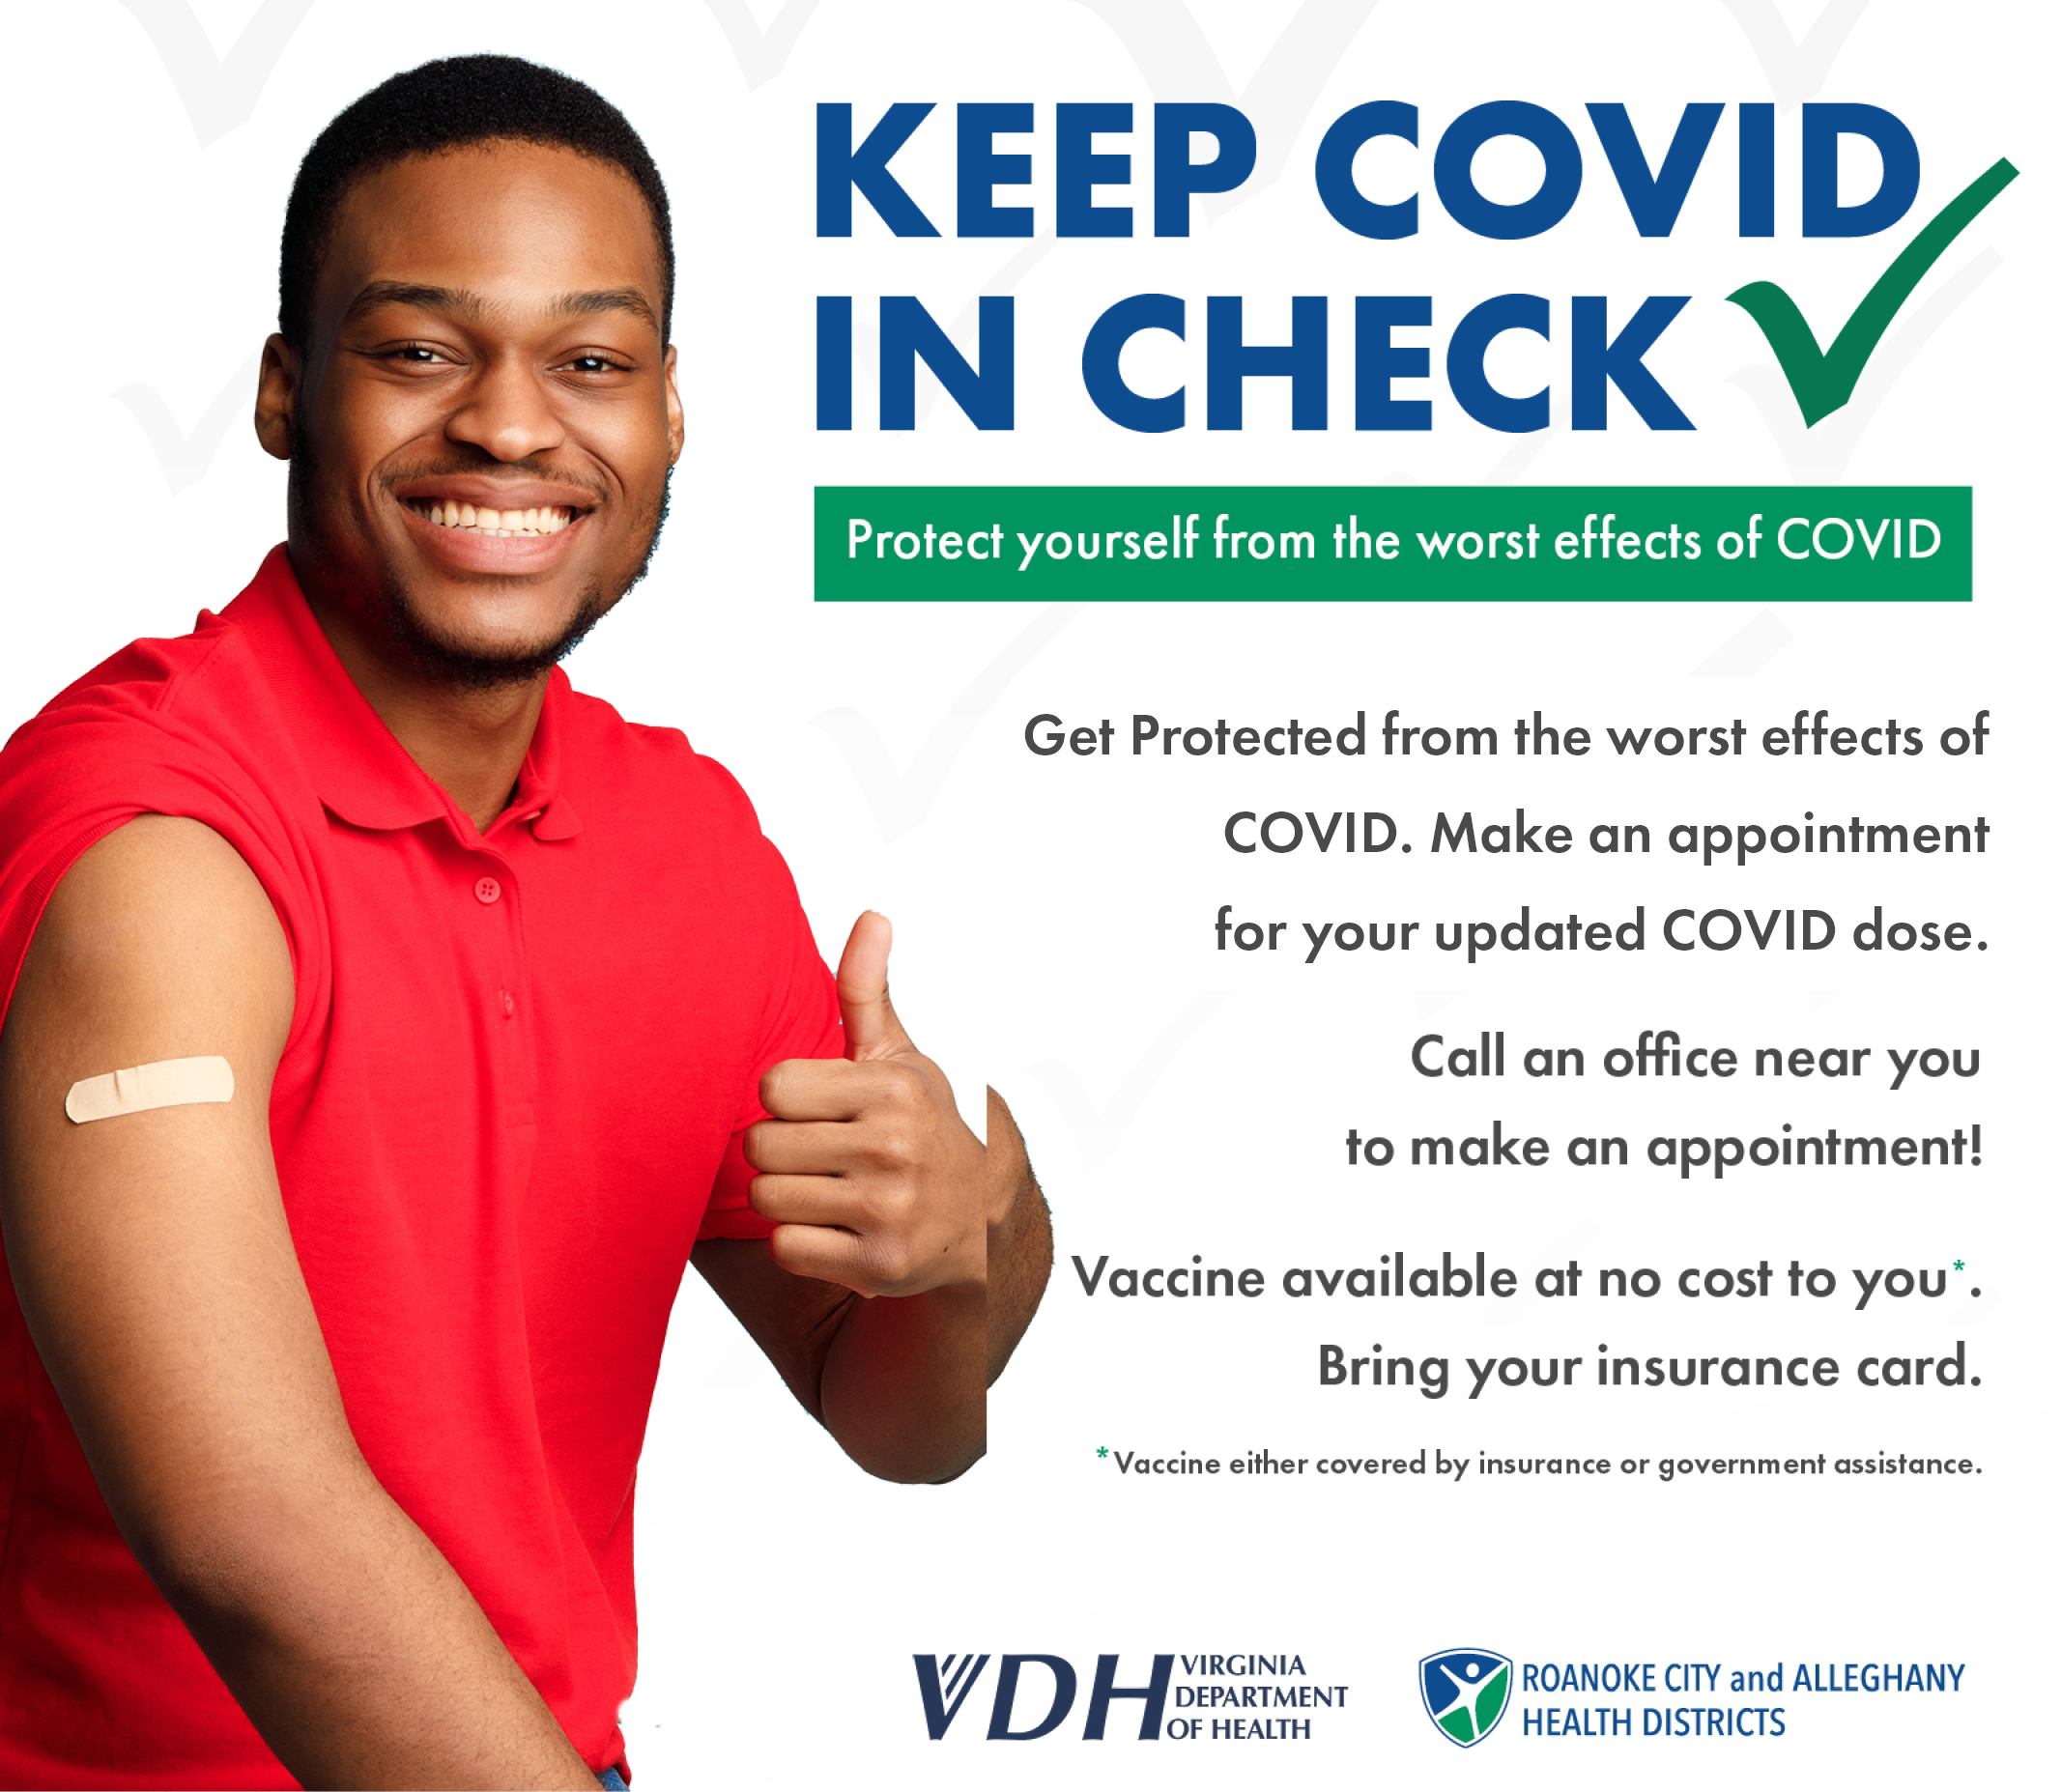 *Man in red shirt with thumbs up and bandage on arm from vaccination* Keep Covid in Check - Protect yourself from the worst effects of COVID - Get protected from the worst effects of COVID. Starting October, 10th make an appointment for your updated COVID dose. Call an office near you to make an appointment - Vaccine available at no cost to you - Bring your insurance card - vaccine either covered by insurance or governments assistance